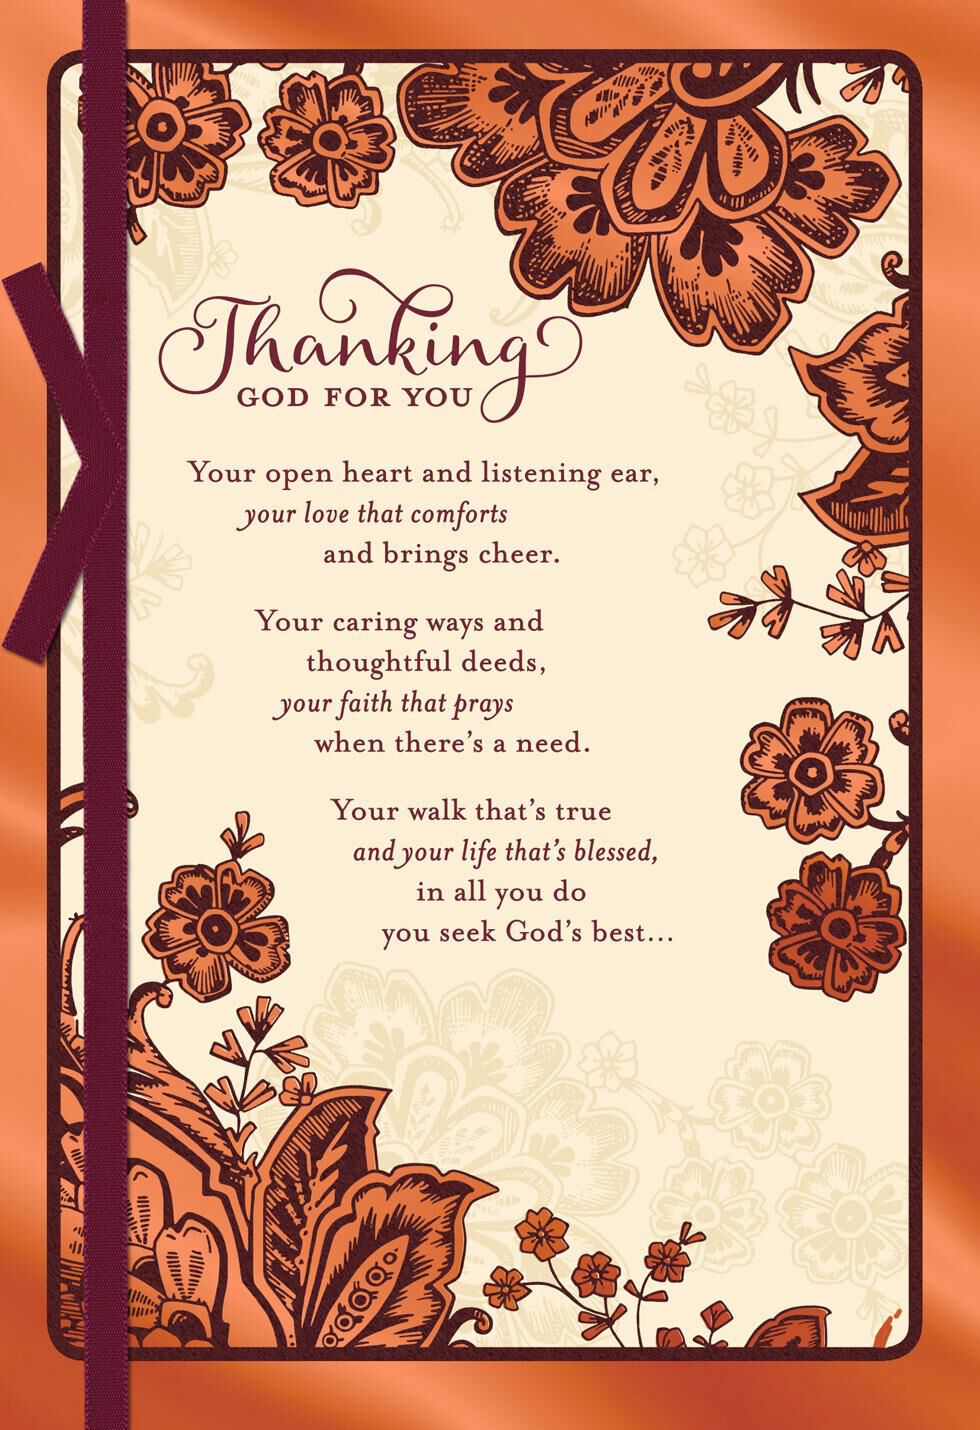 thanking-god-for-you-religious-thanksgiving-card-greeting-cards